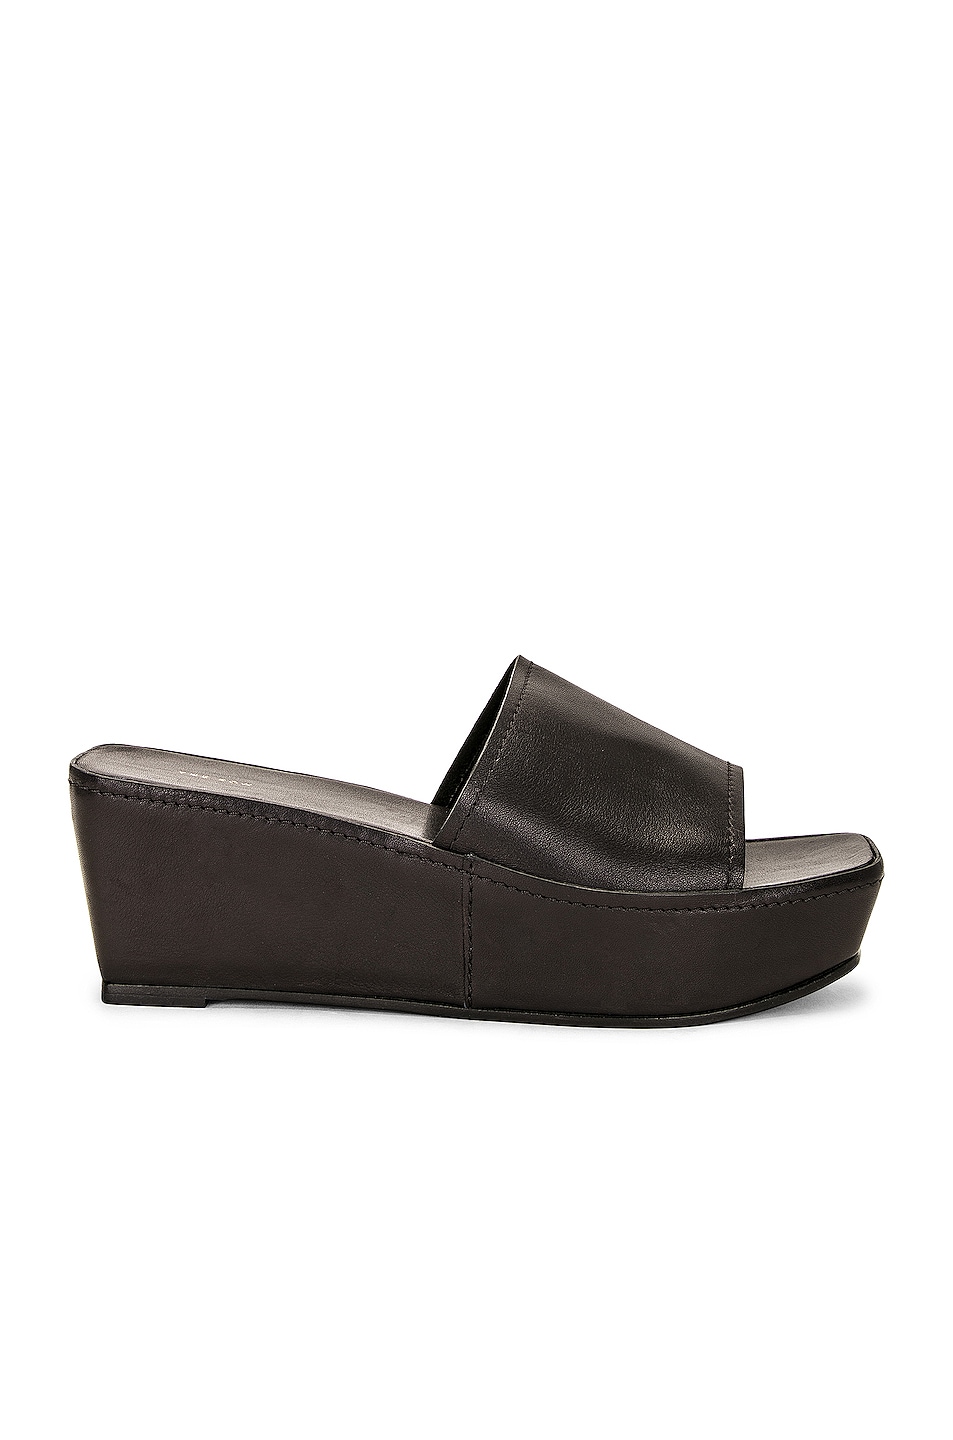 Image 1 of The Row Tate Slide Sandal in Black